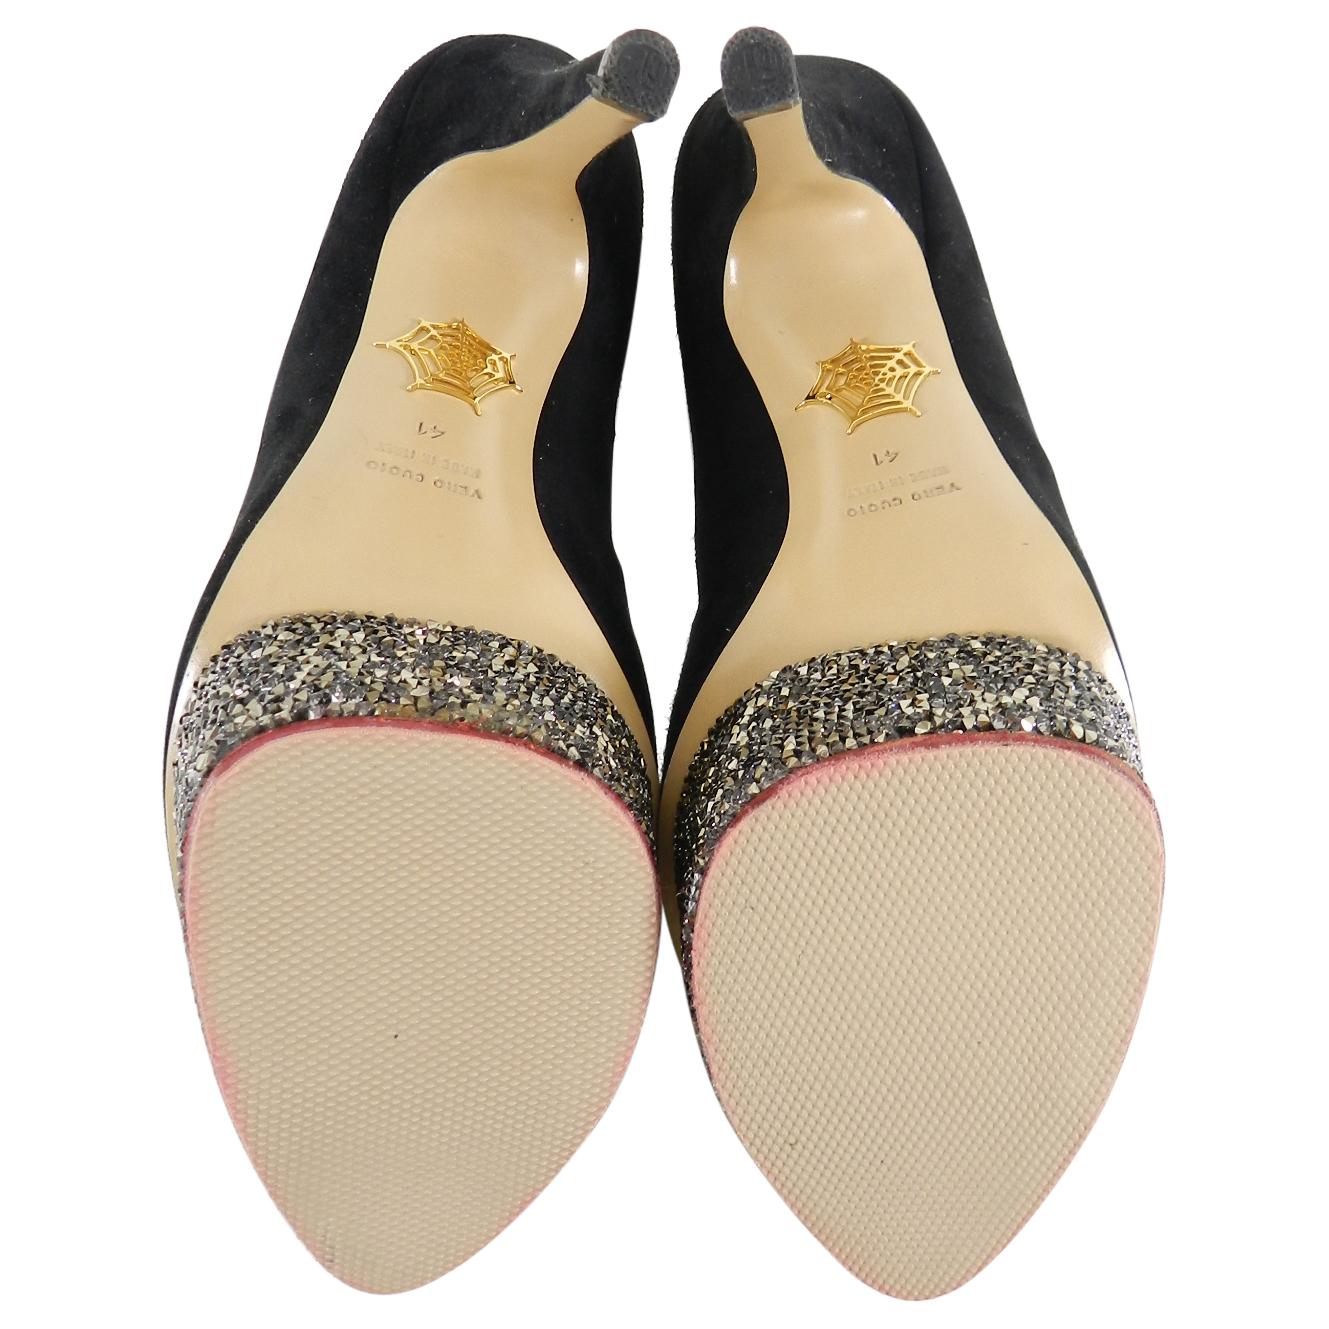 Women's Charlotte Olympia Dolly Crystal Suede 150 mm Platform Pumps - 41